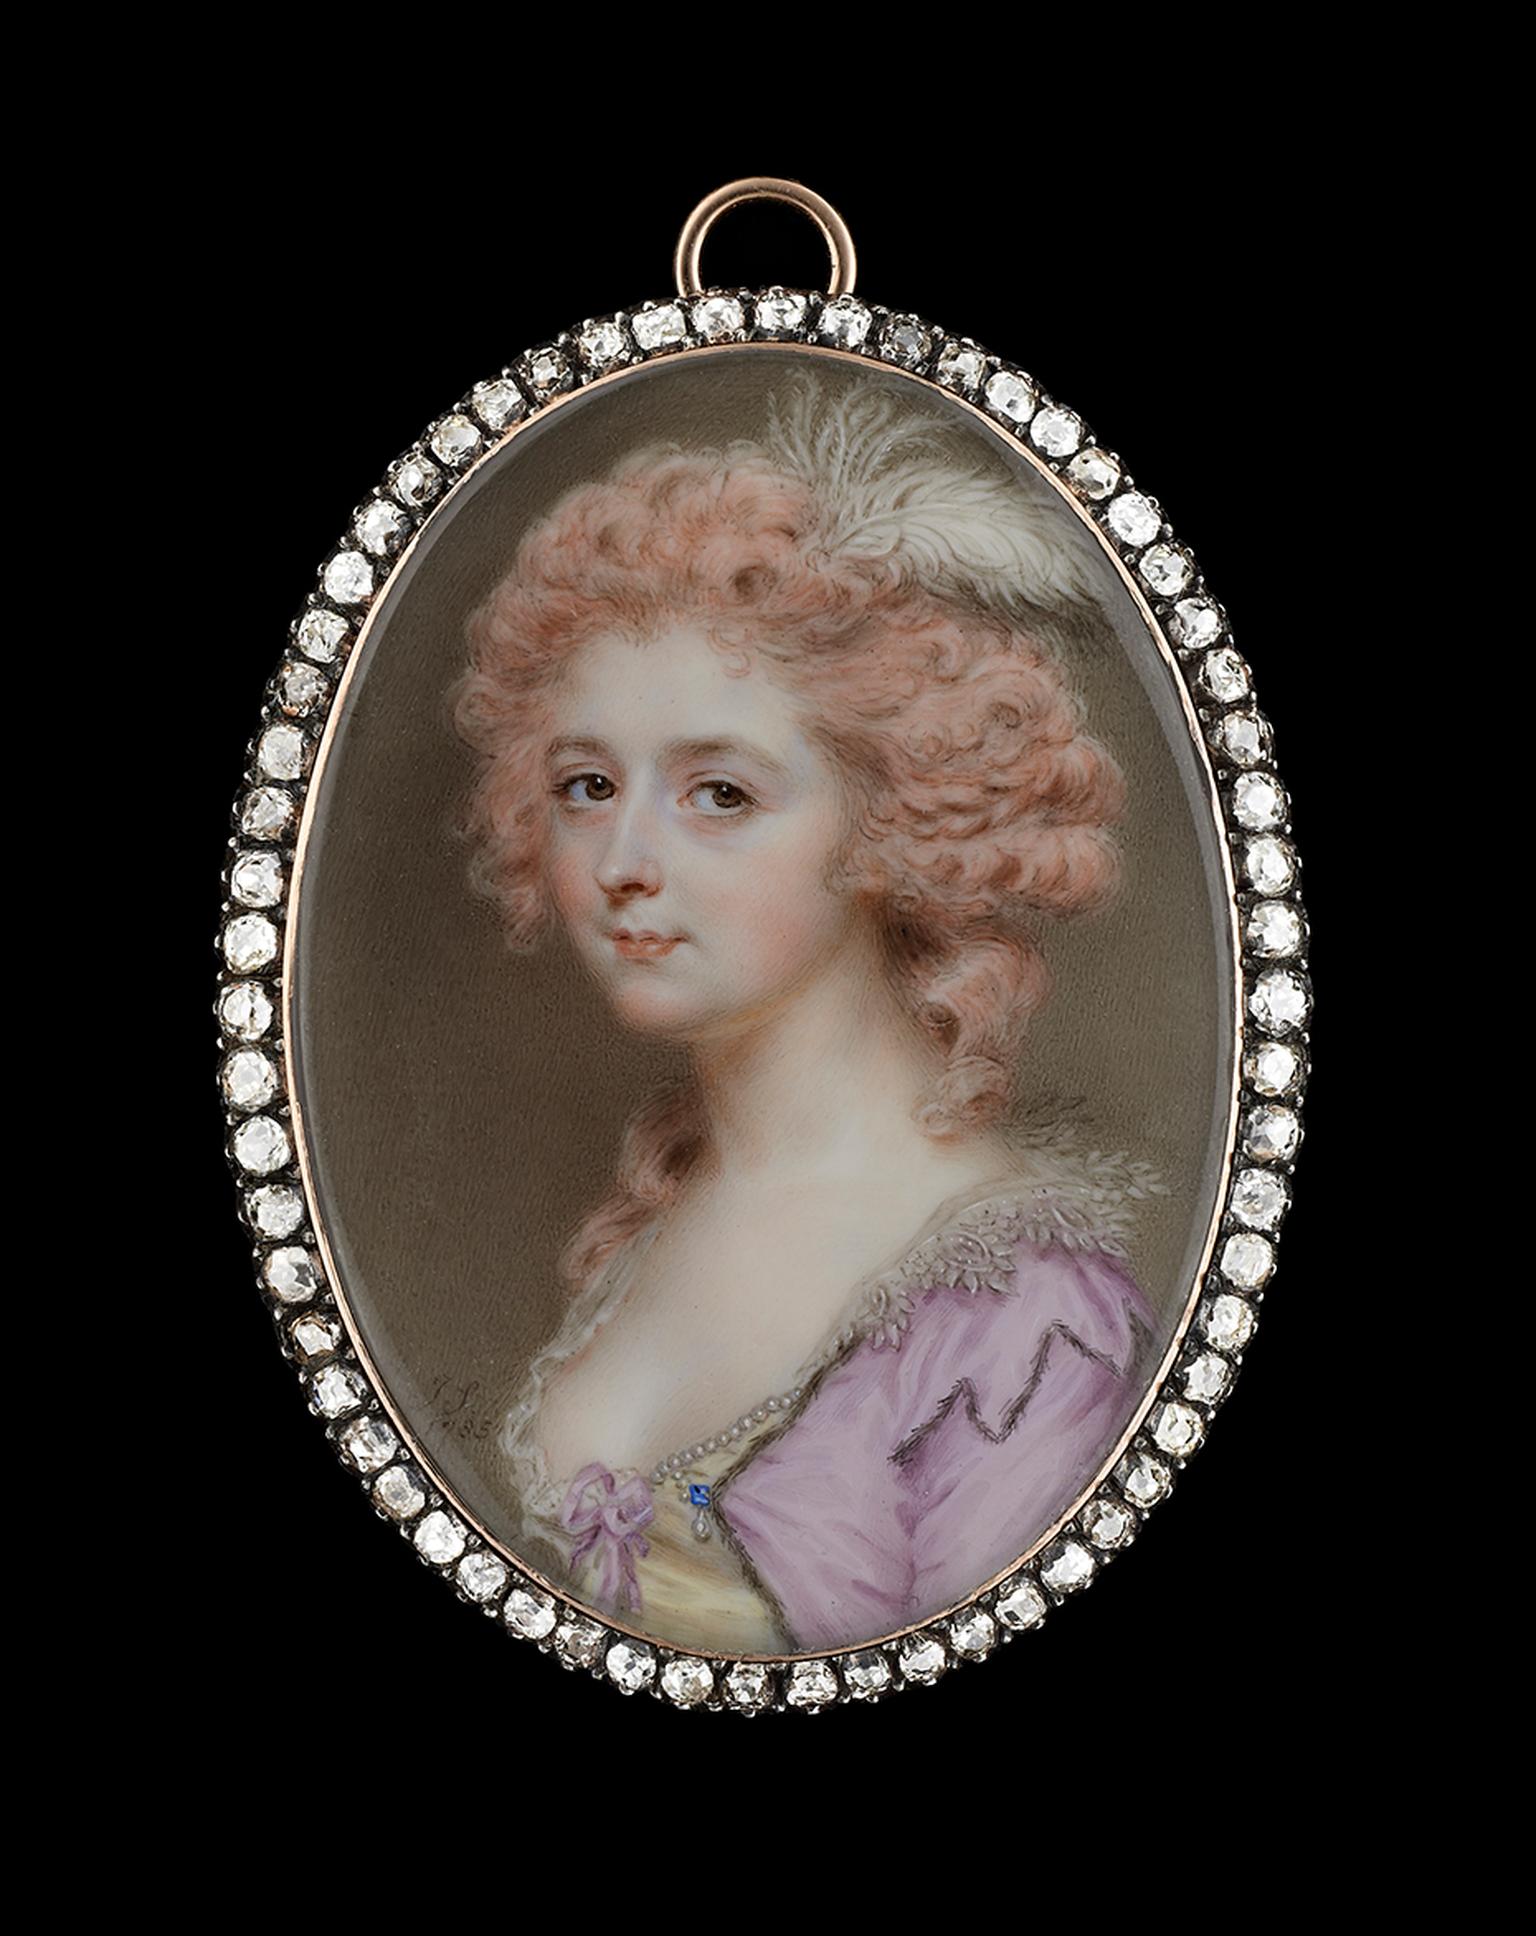 John Smart diamond encrusted miniature depicting a lady wearing a dress with a jewelled pearl and sapphire clasp. Image by: Philip Mould & Company.